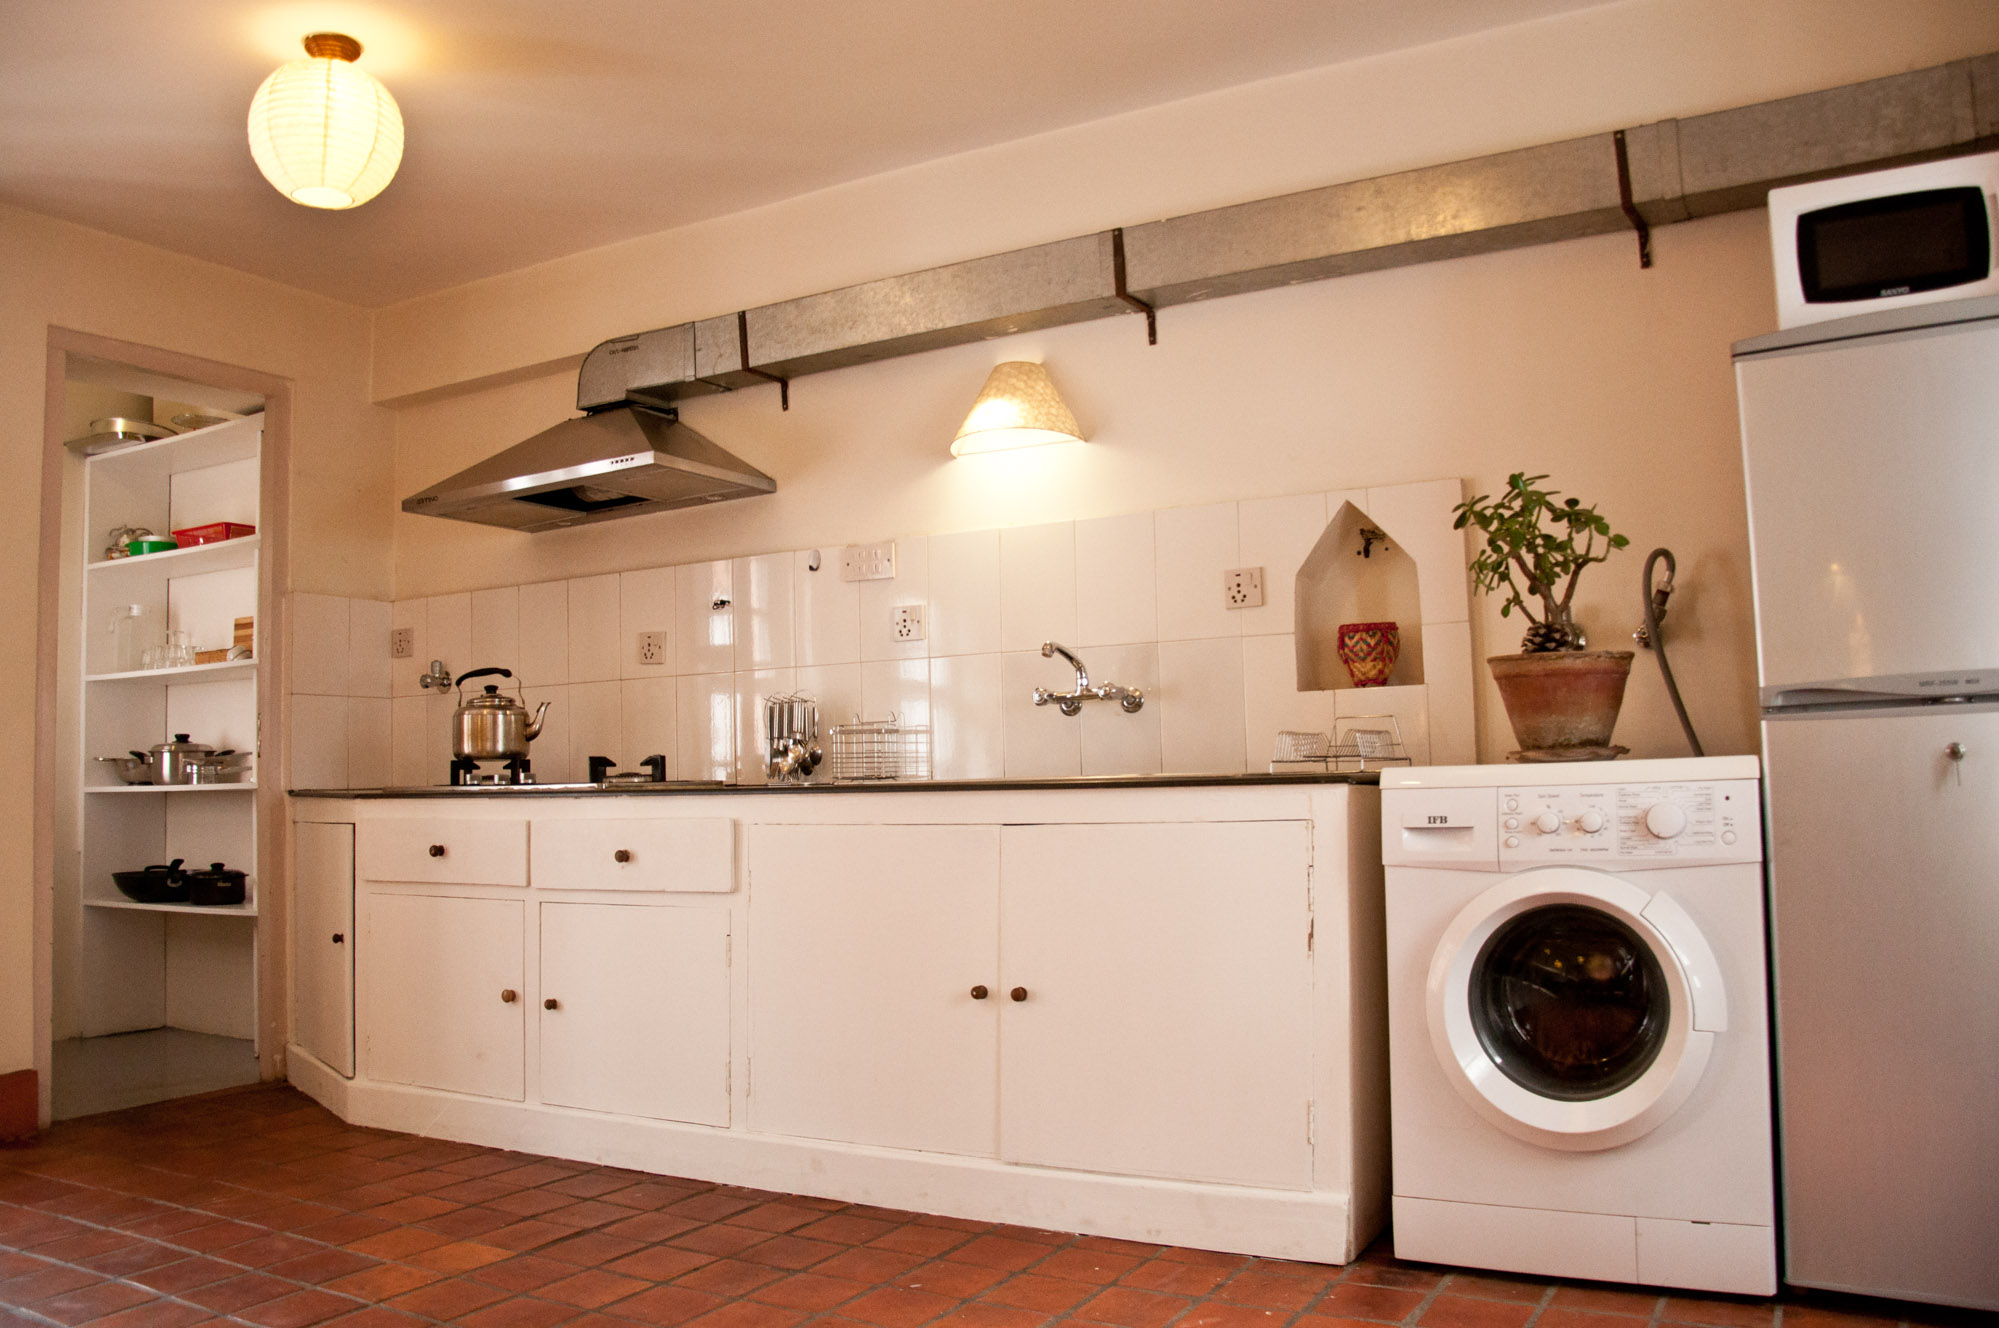 Fully equiped kitchen, microwave, washine machine and storage space. 